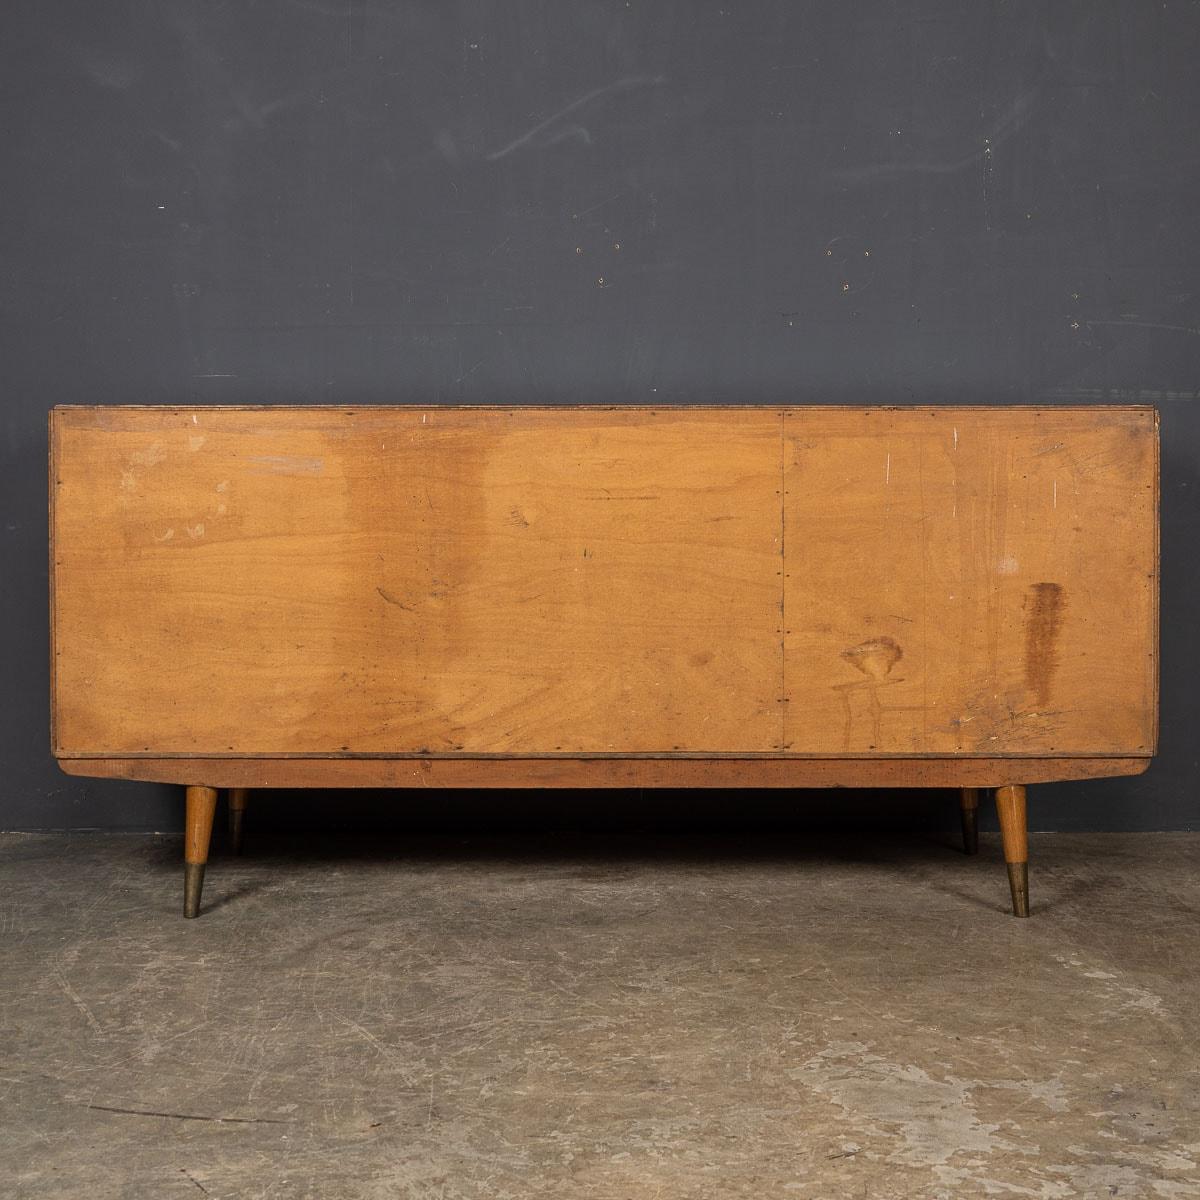 20th Century Italian Credenza With Brass Handles, c.1950 For Sale 1